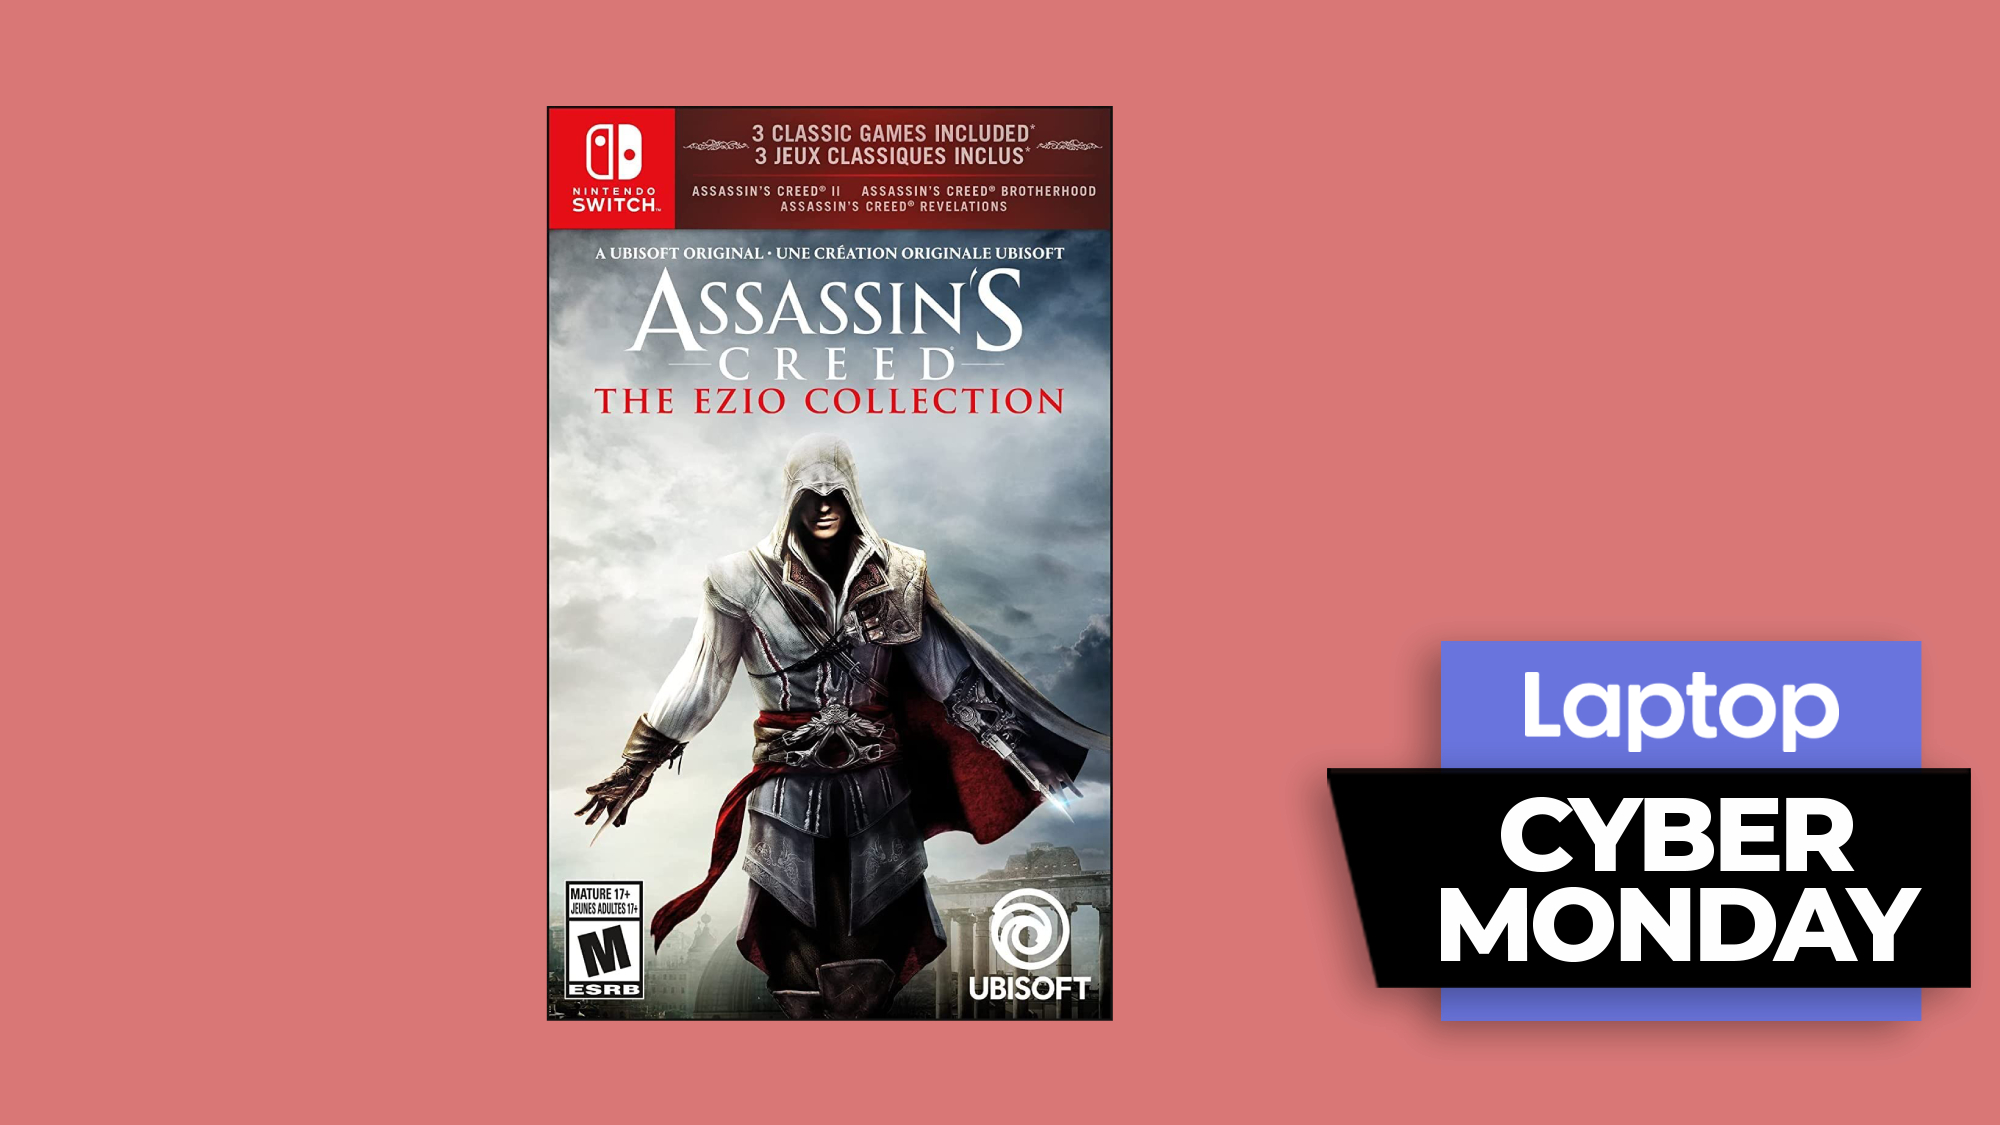 Assassin’s Creed The Ezio Collection Cyber Monday deal